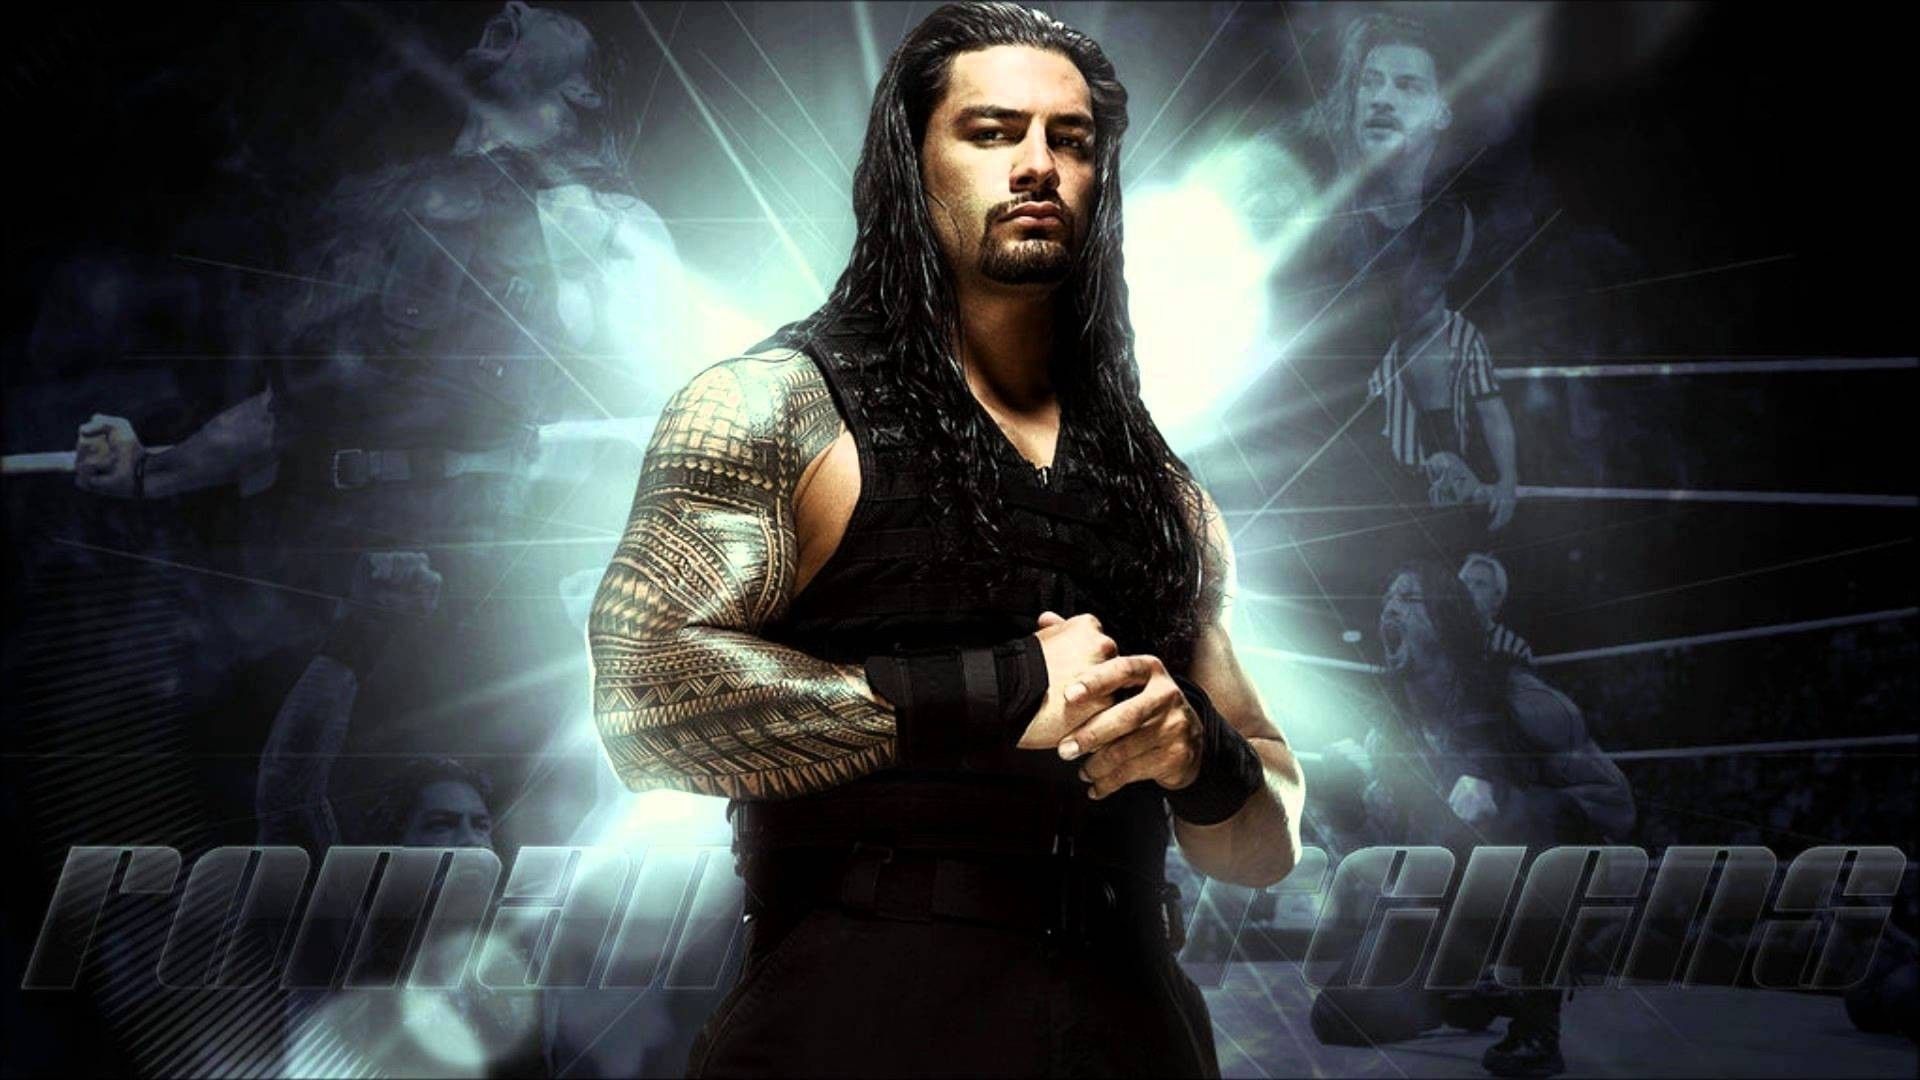 Roman Reigns Wallpaper: 26 Image, People Category